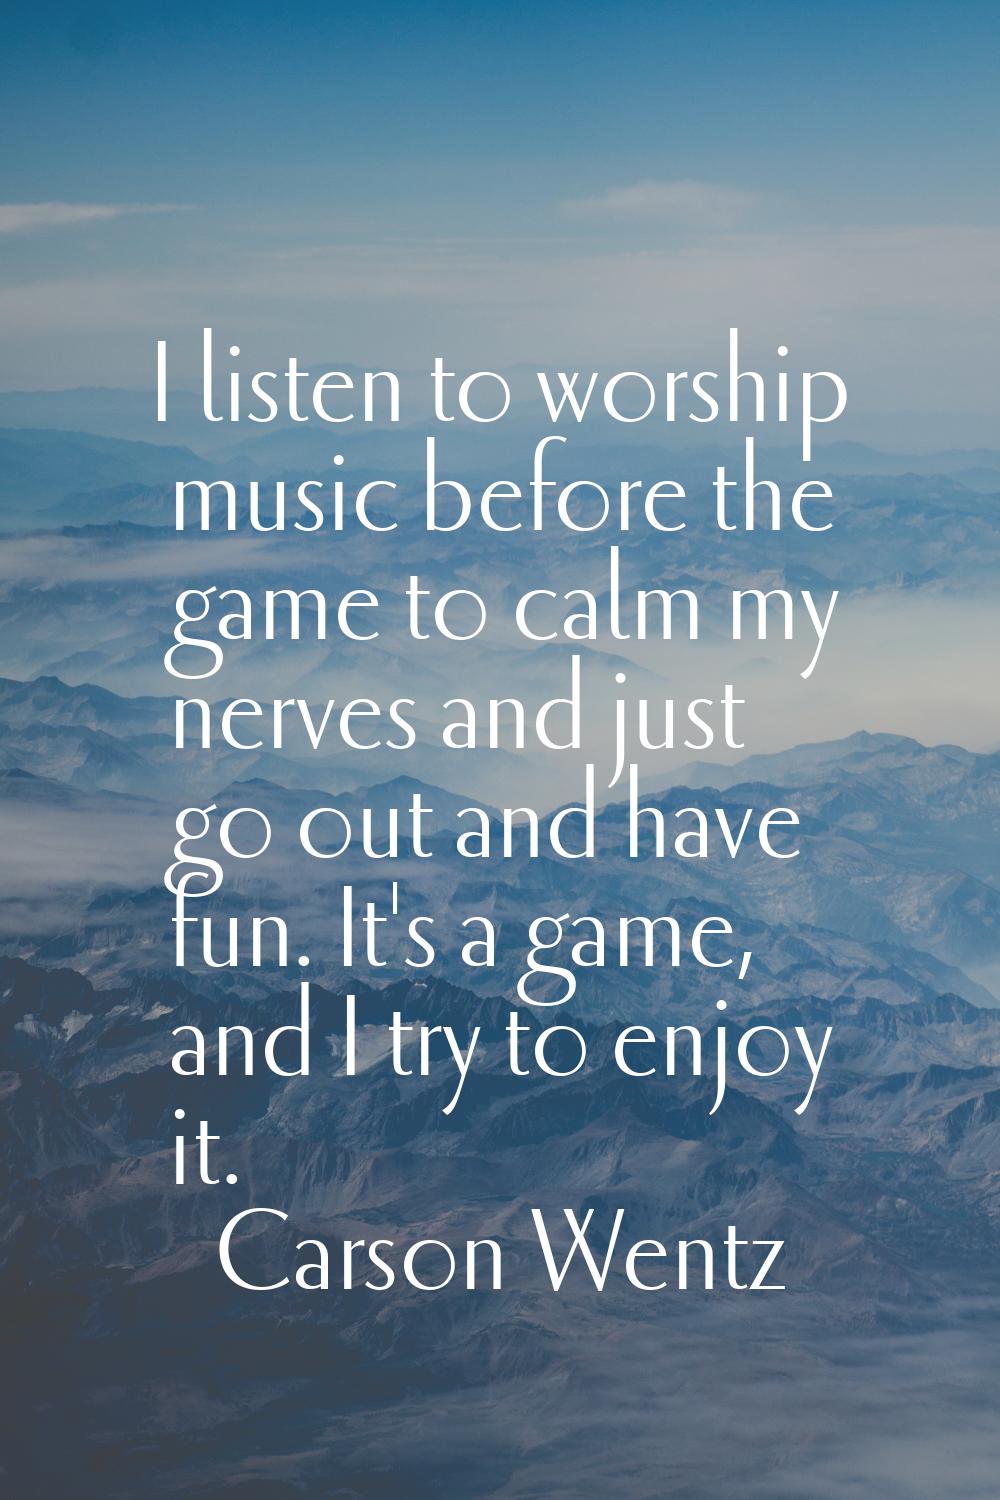 I listen to worship music before the game to calm my nerves and just go out and have fun. It's a ga